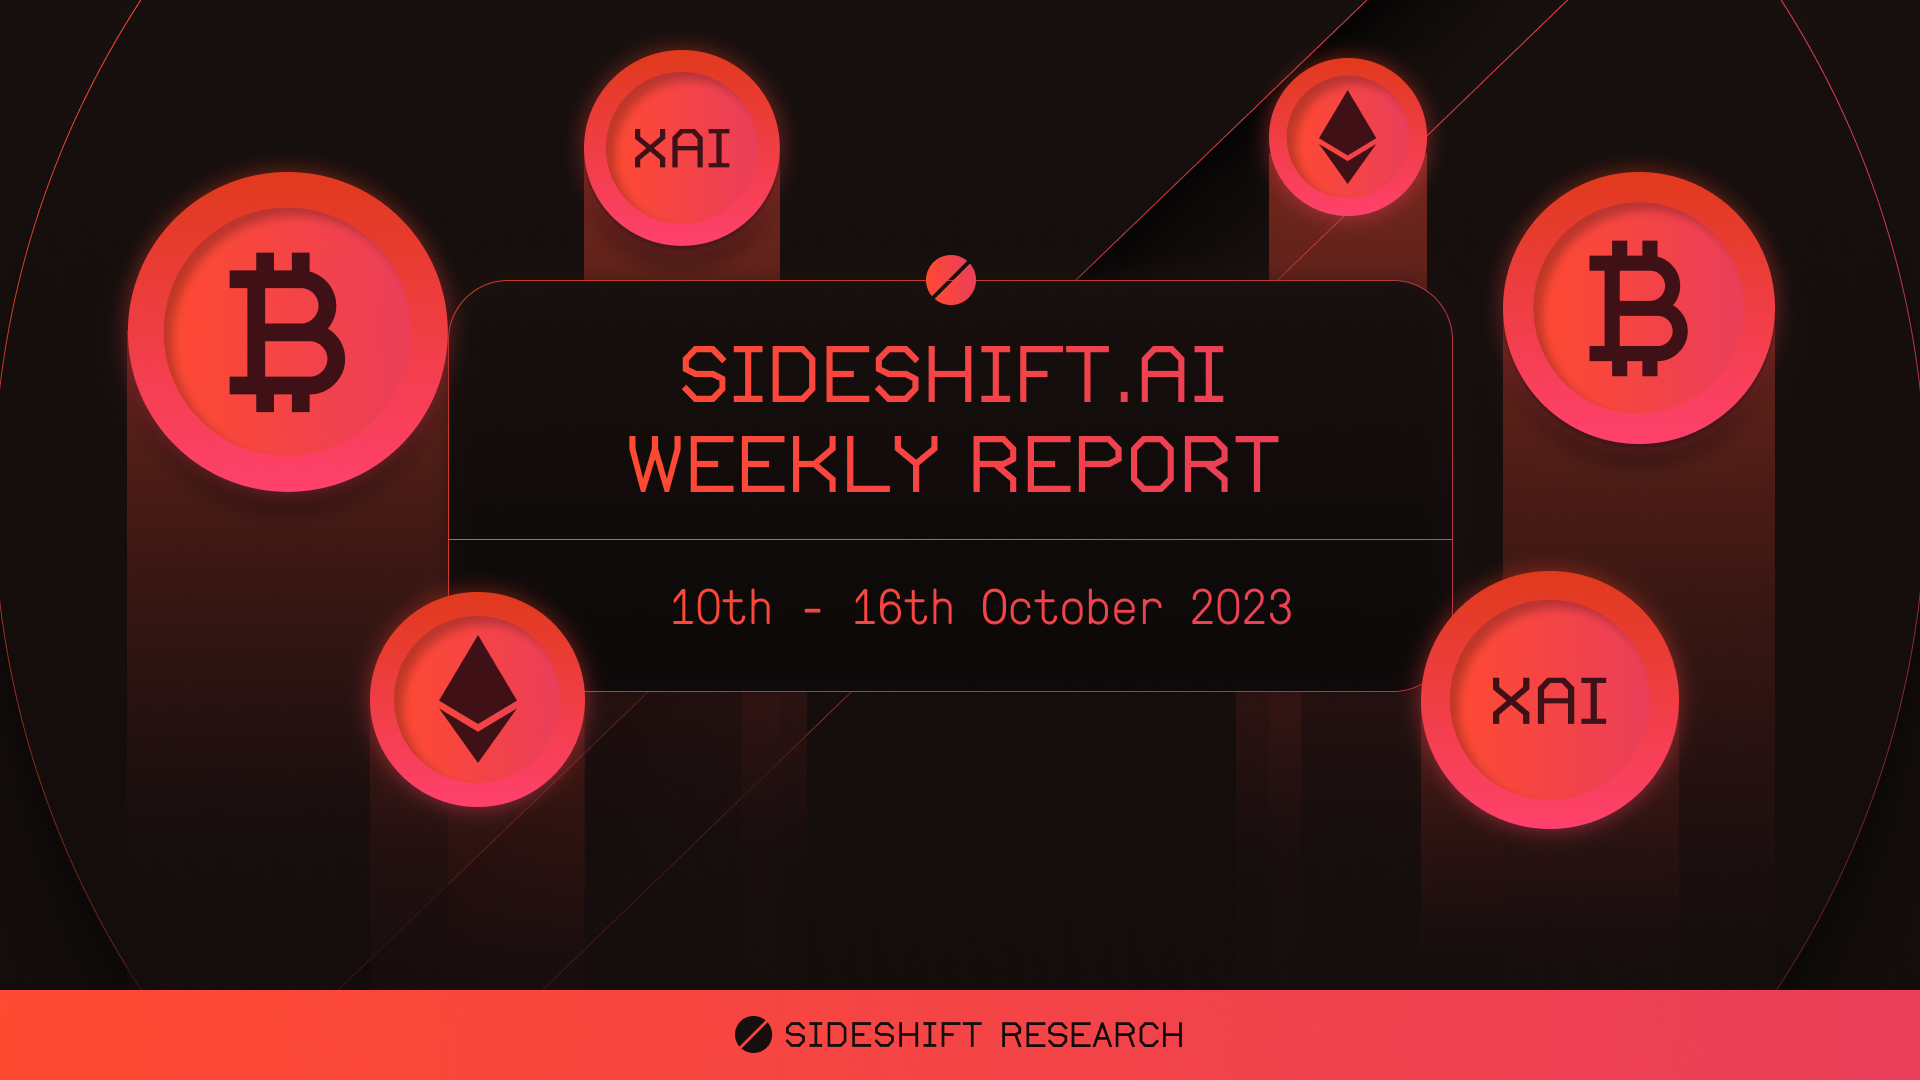 SideShift.ai Weekly Report | 10th - 16th October 2023